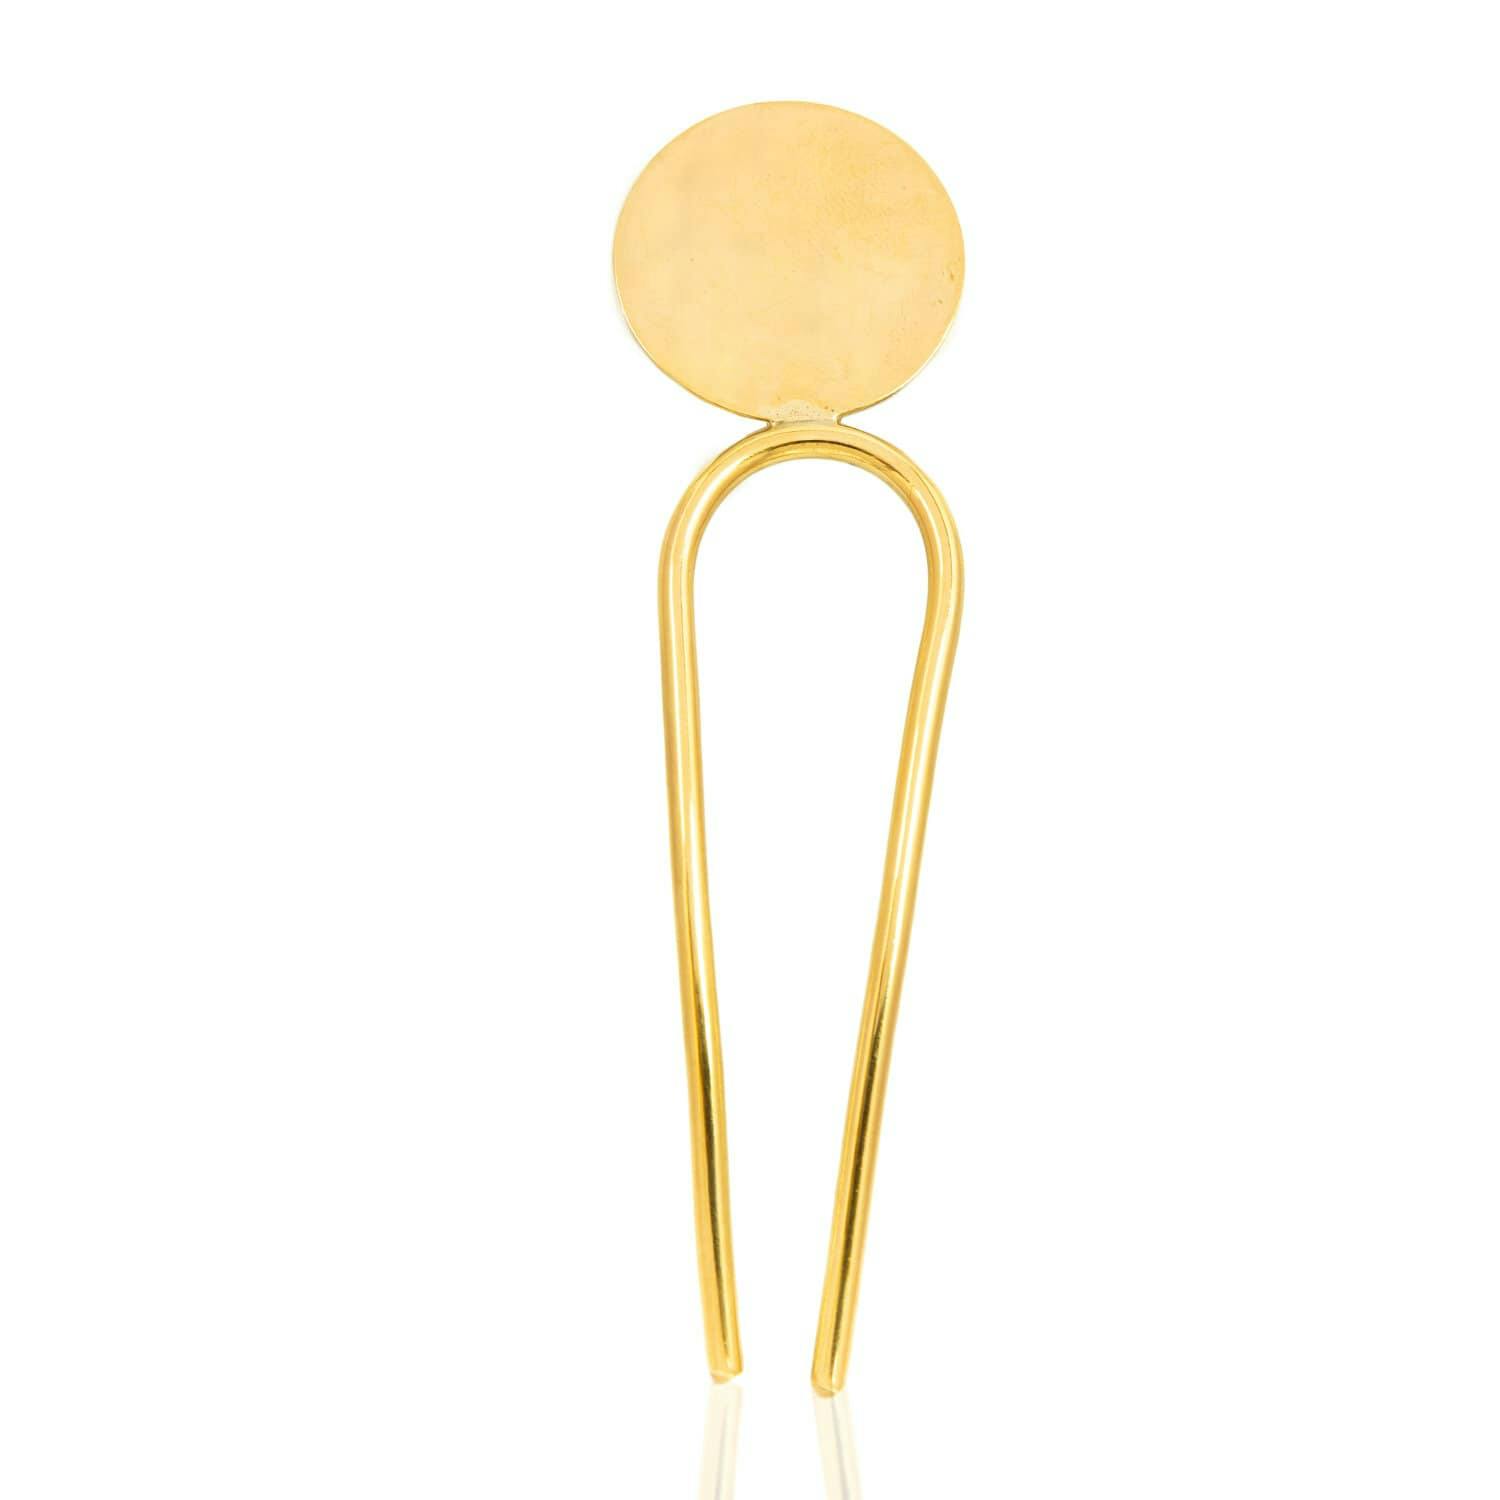 Masara Hairpin, a product by Adele Dejak